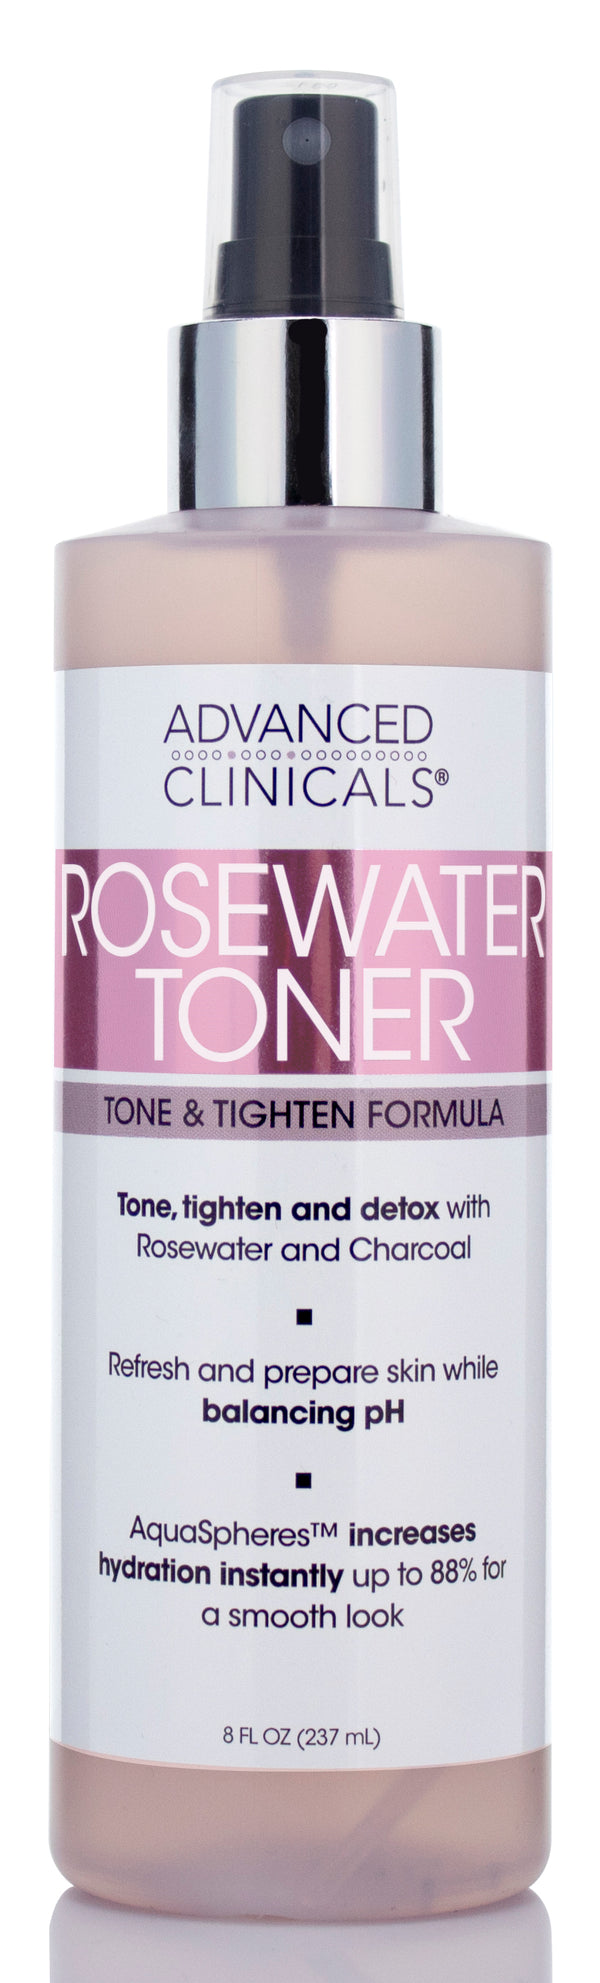 8oz Advanced Clinicals Rosewater Toner with Charcoal and Aloe Vera.  Balancing PH formula detoxifies and hydrates skin and improves overall skin tone.  Alcohol-free. - Pure Valley 